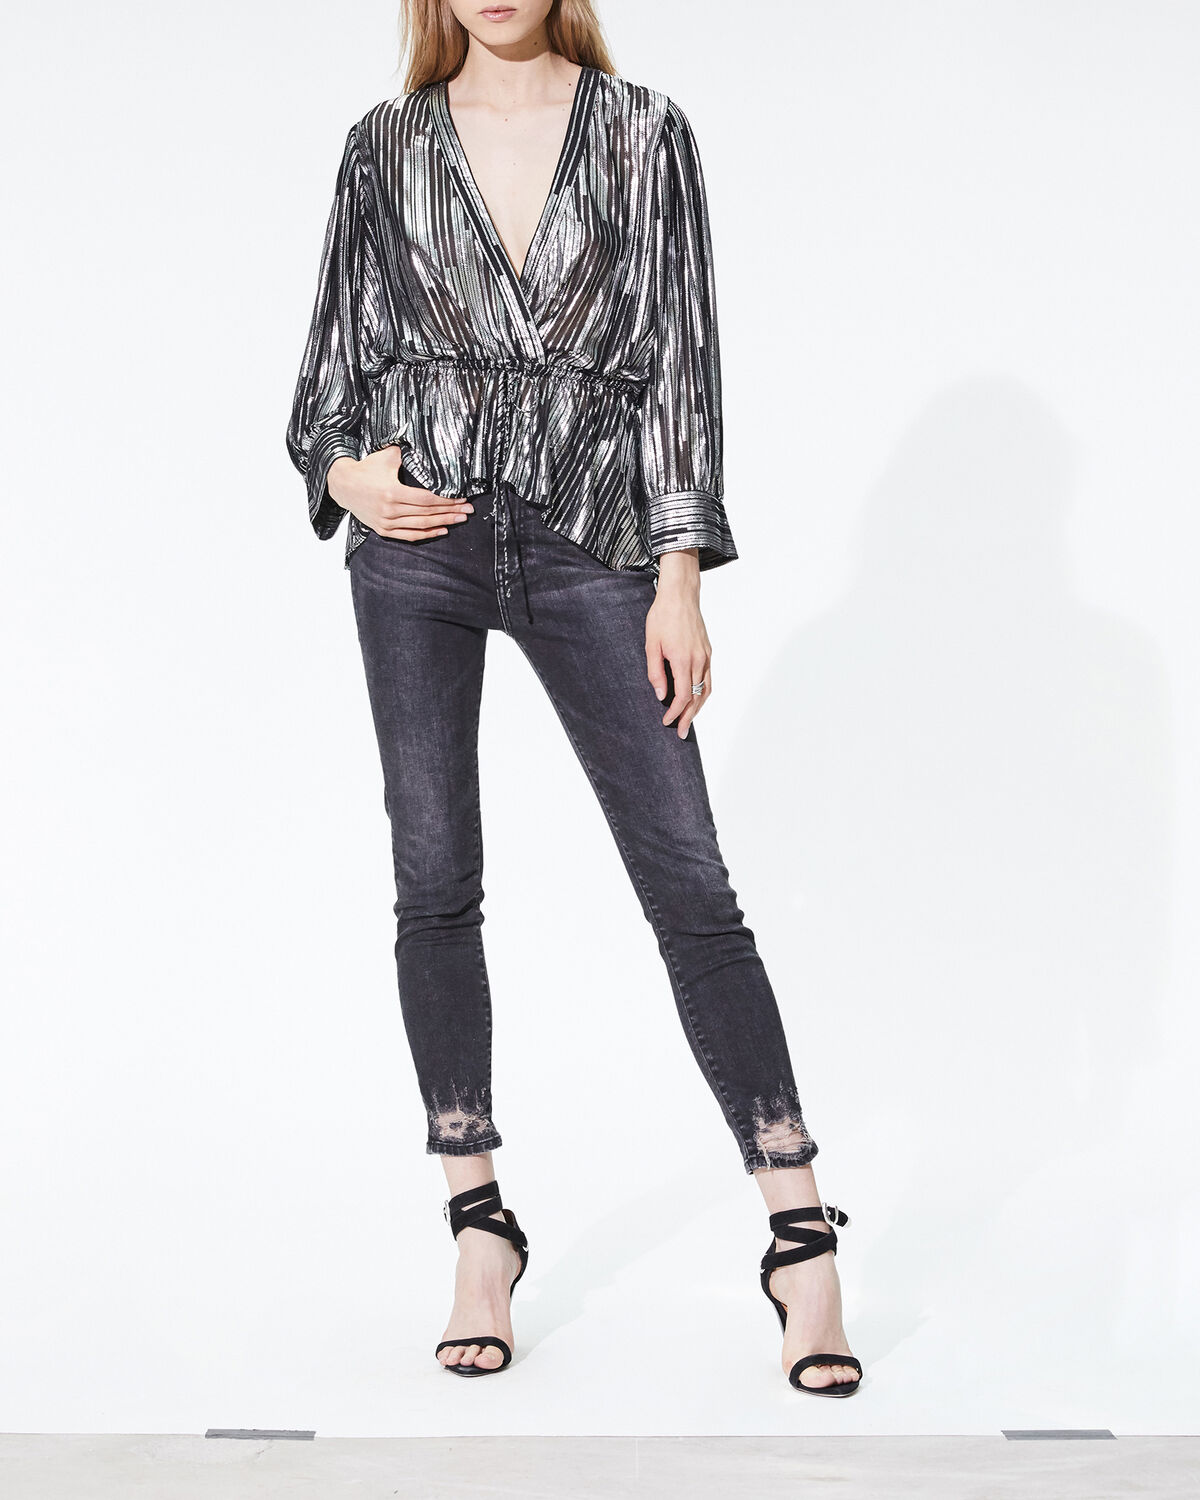 Photo of IRO Paris Darla Top Black And Silver - Lightweight And Fluid, This Transparent Top Features Fine Silver Lurex Stripes And A Wrapover Neckline. With Its Tightenable Waist, This Aerial Piece Can Be Worn On All Occasions. Fall Winter 19